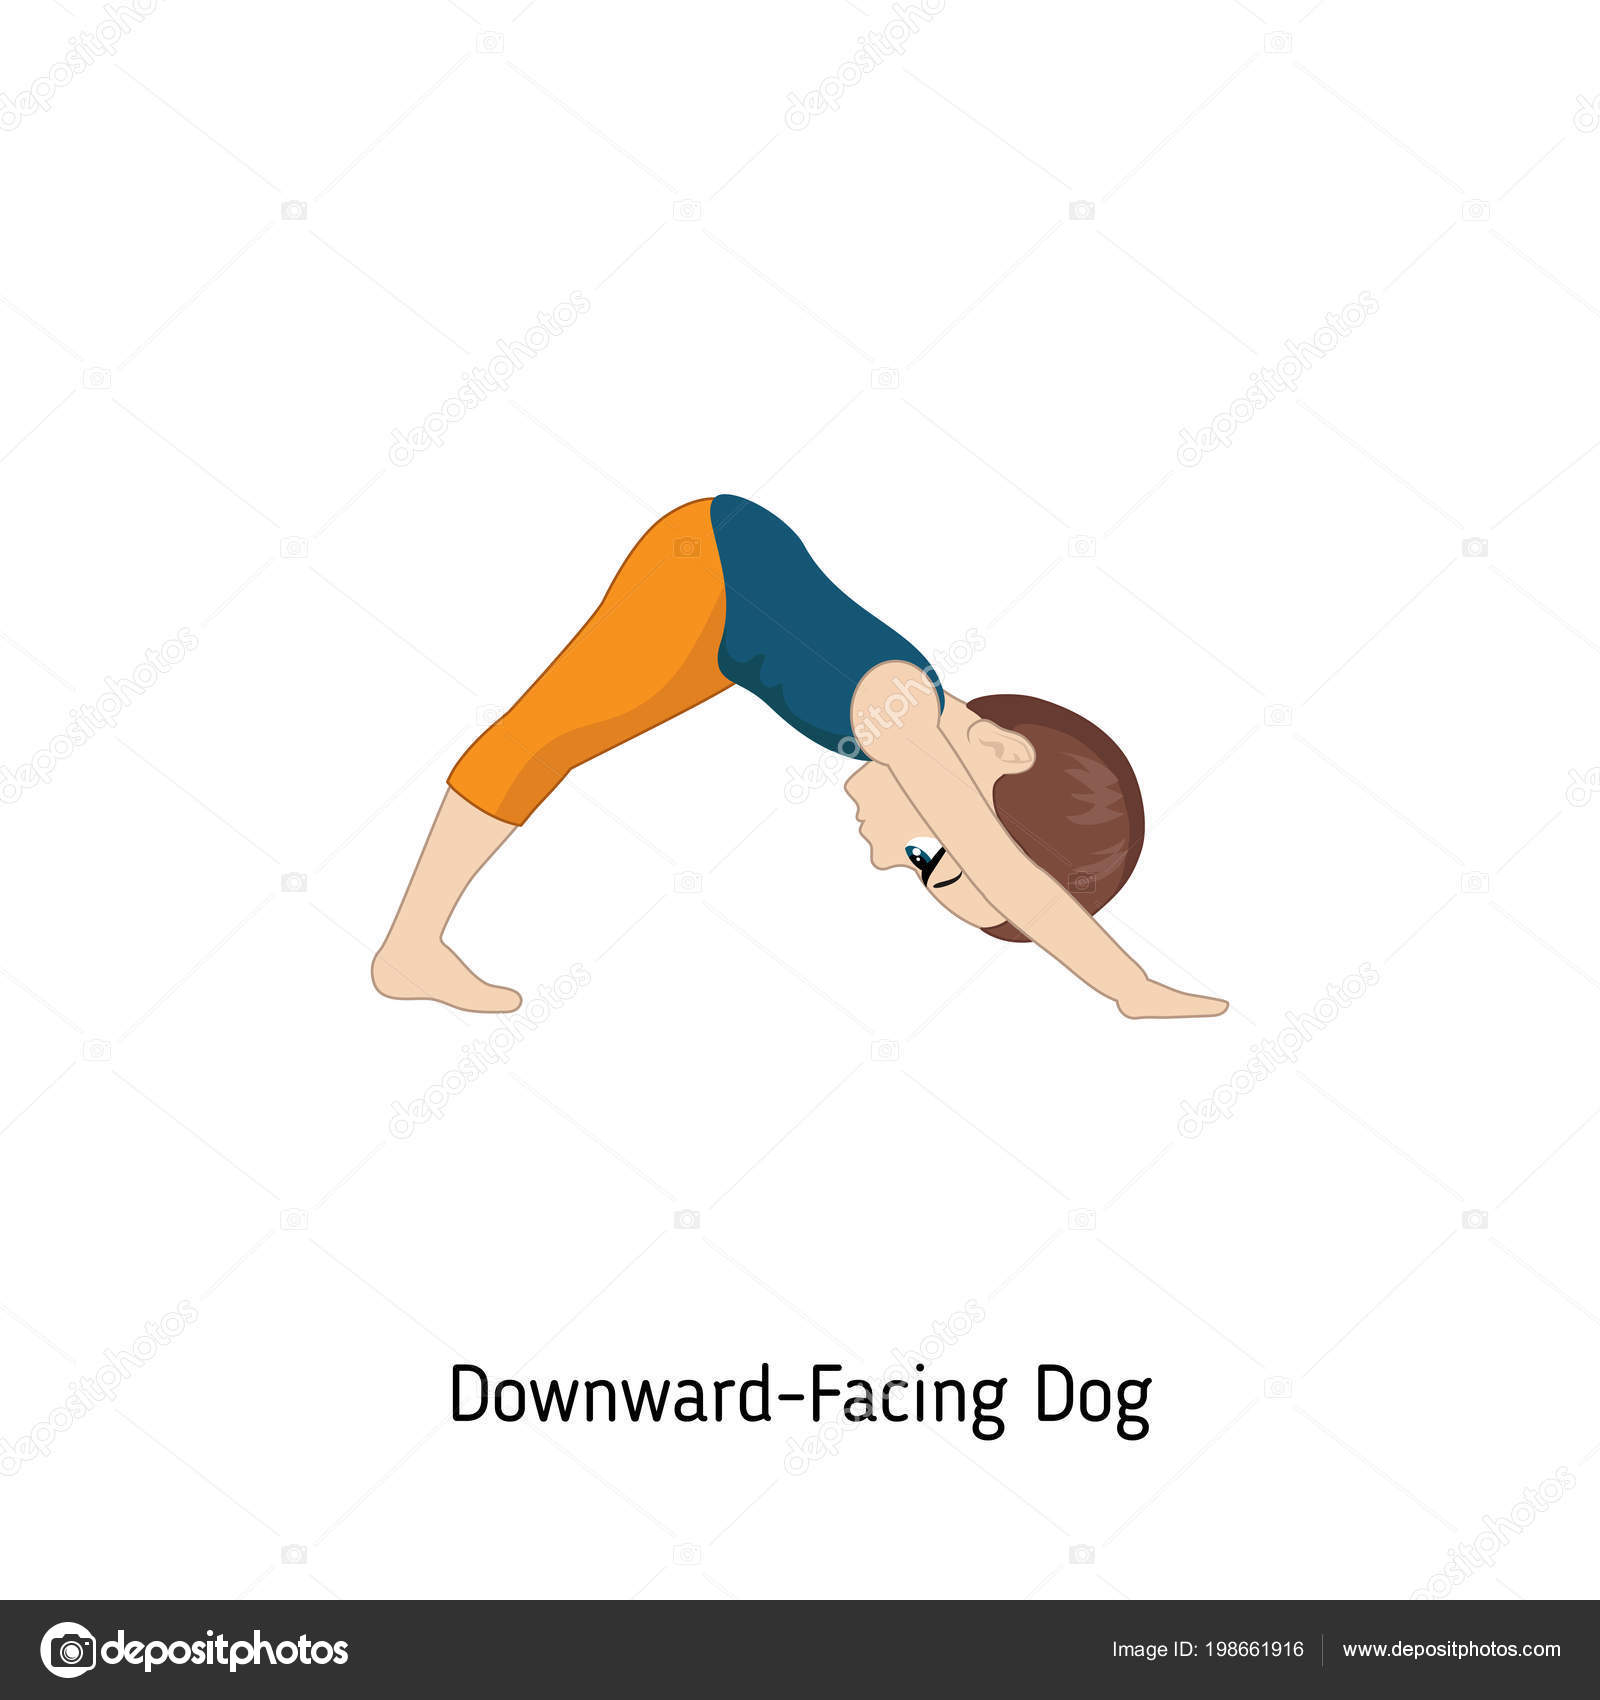 7 “ Morning “ Yoga Poses You Can Do Anywhere | by Dixapatel | Medium